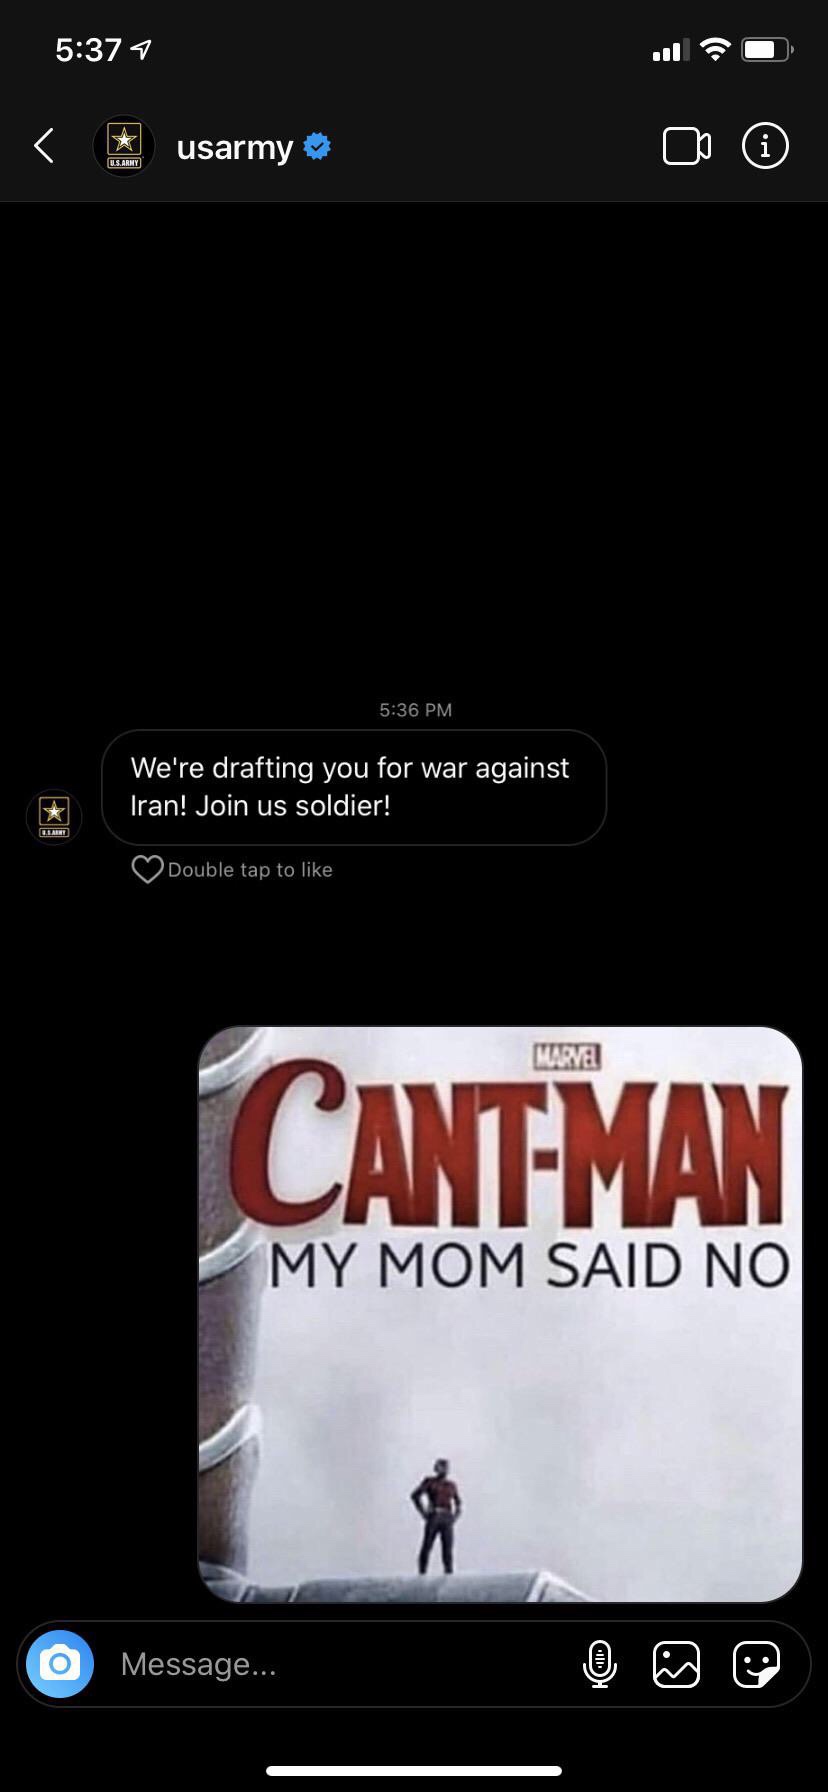 screenshot - usarmy We're drafting you for war against Iran! Join us soldier! Double tap to Hurma CantMan My Mom Said No Message...